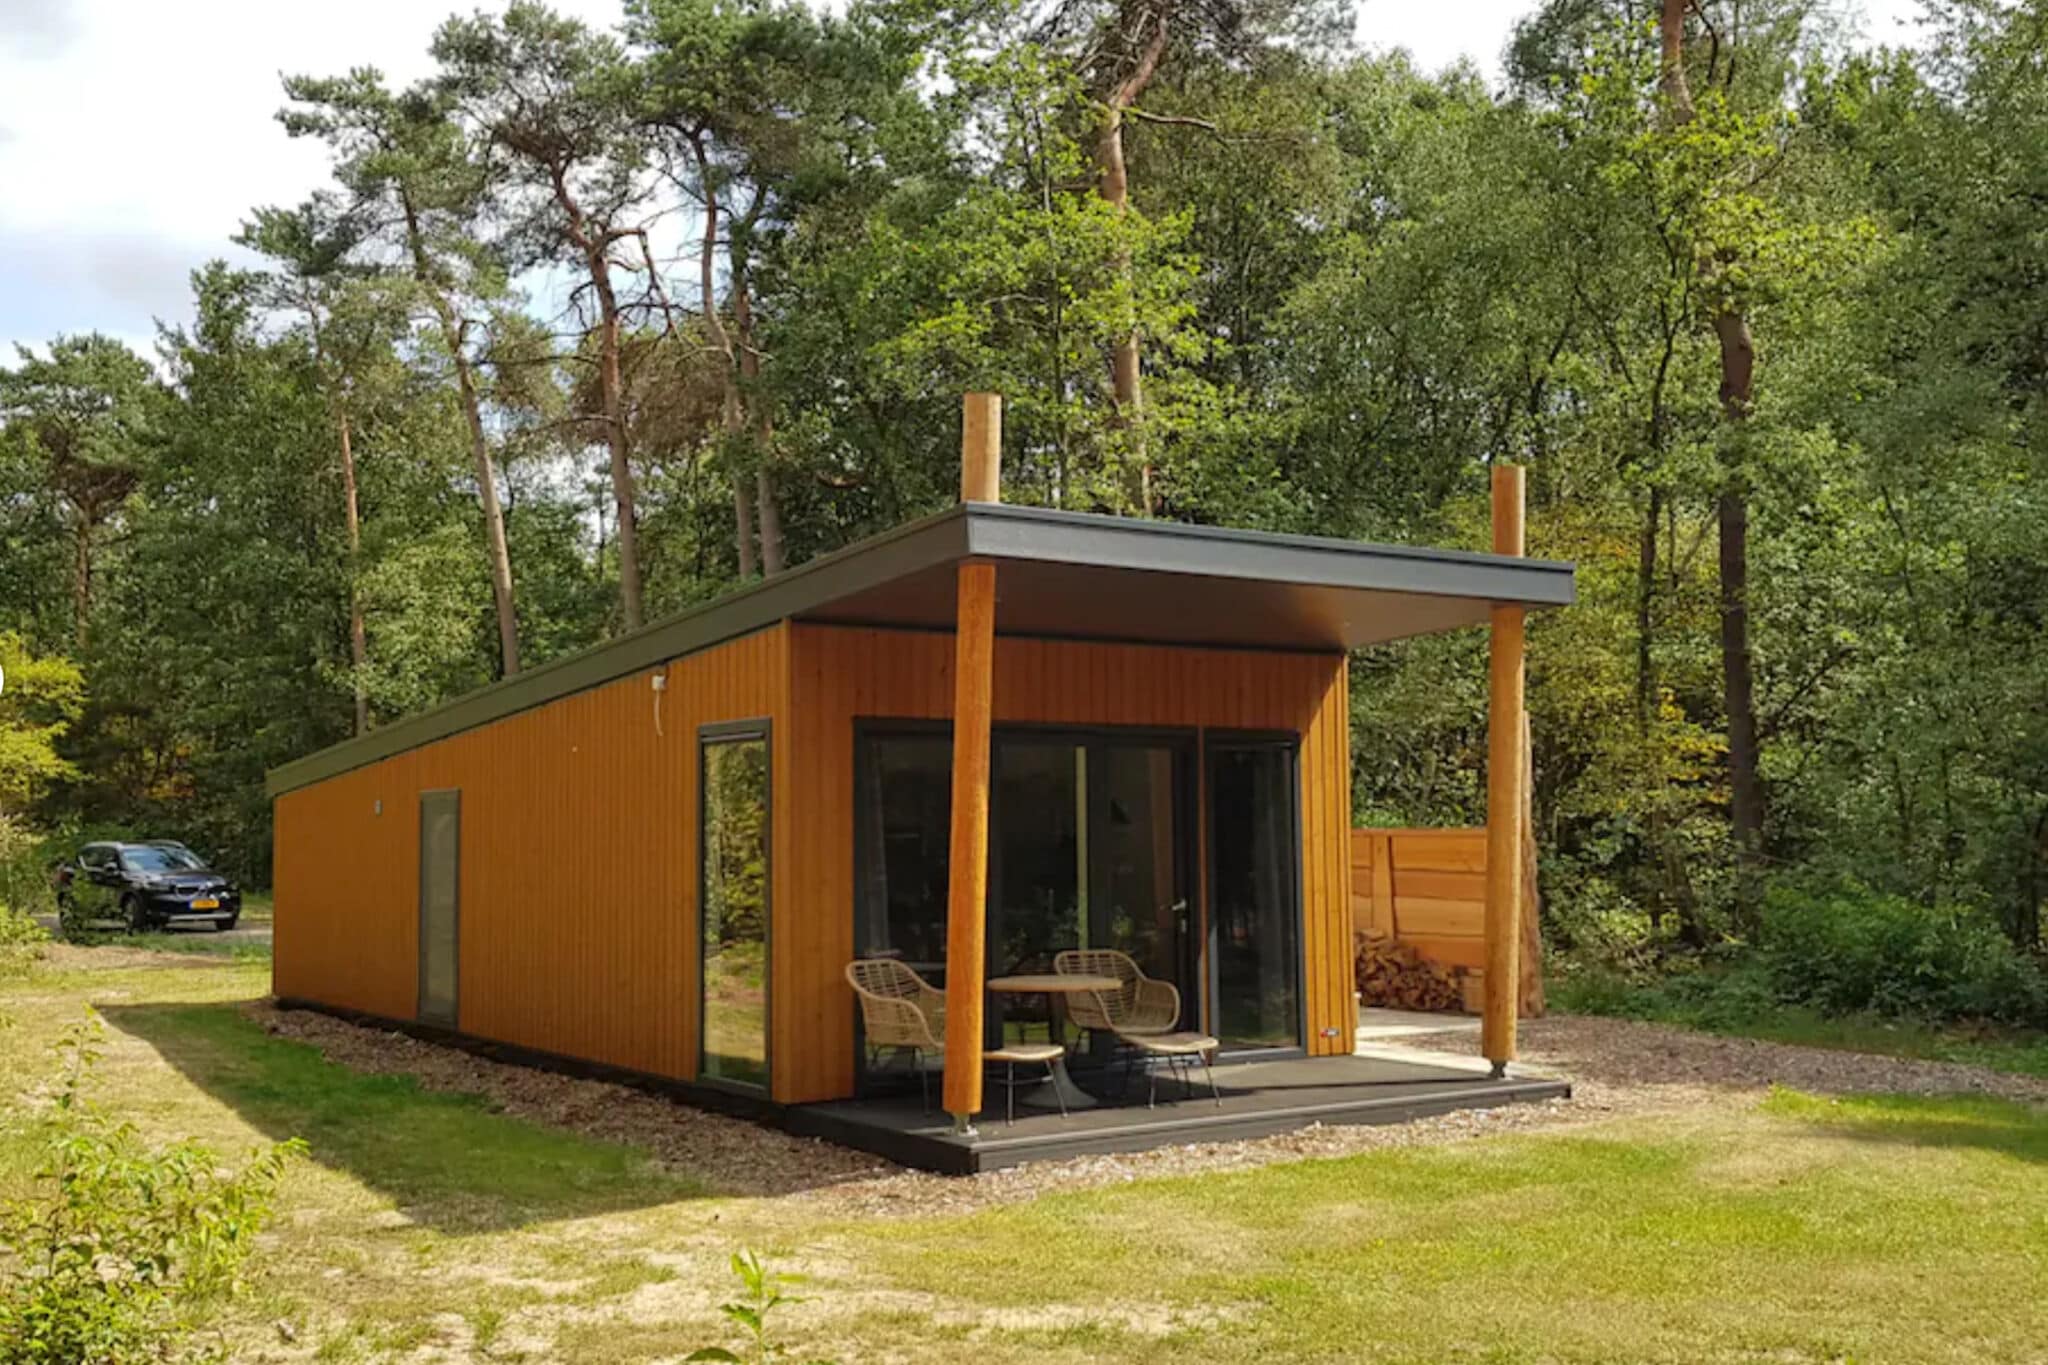 Luxury lodge with air conditioning and dishwasher, in a holiday park, by a lake